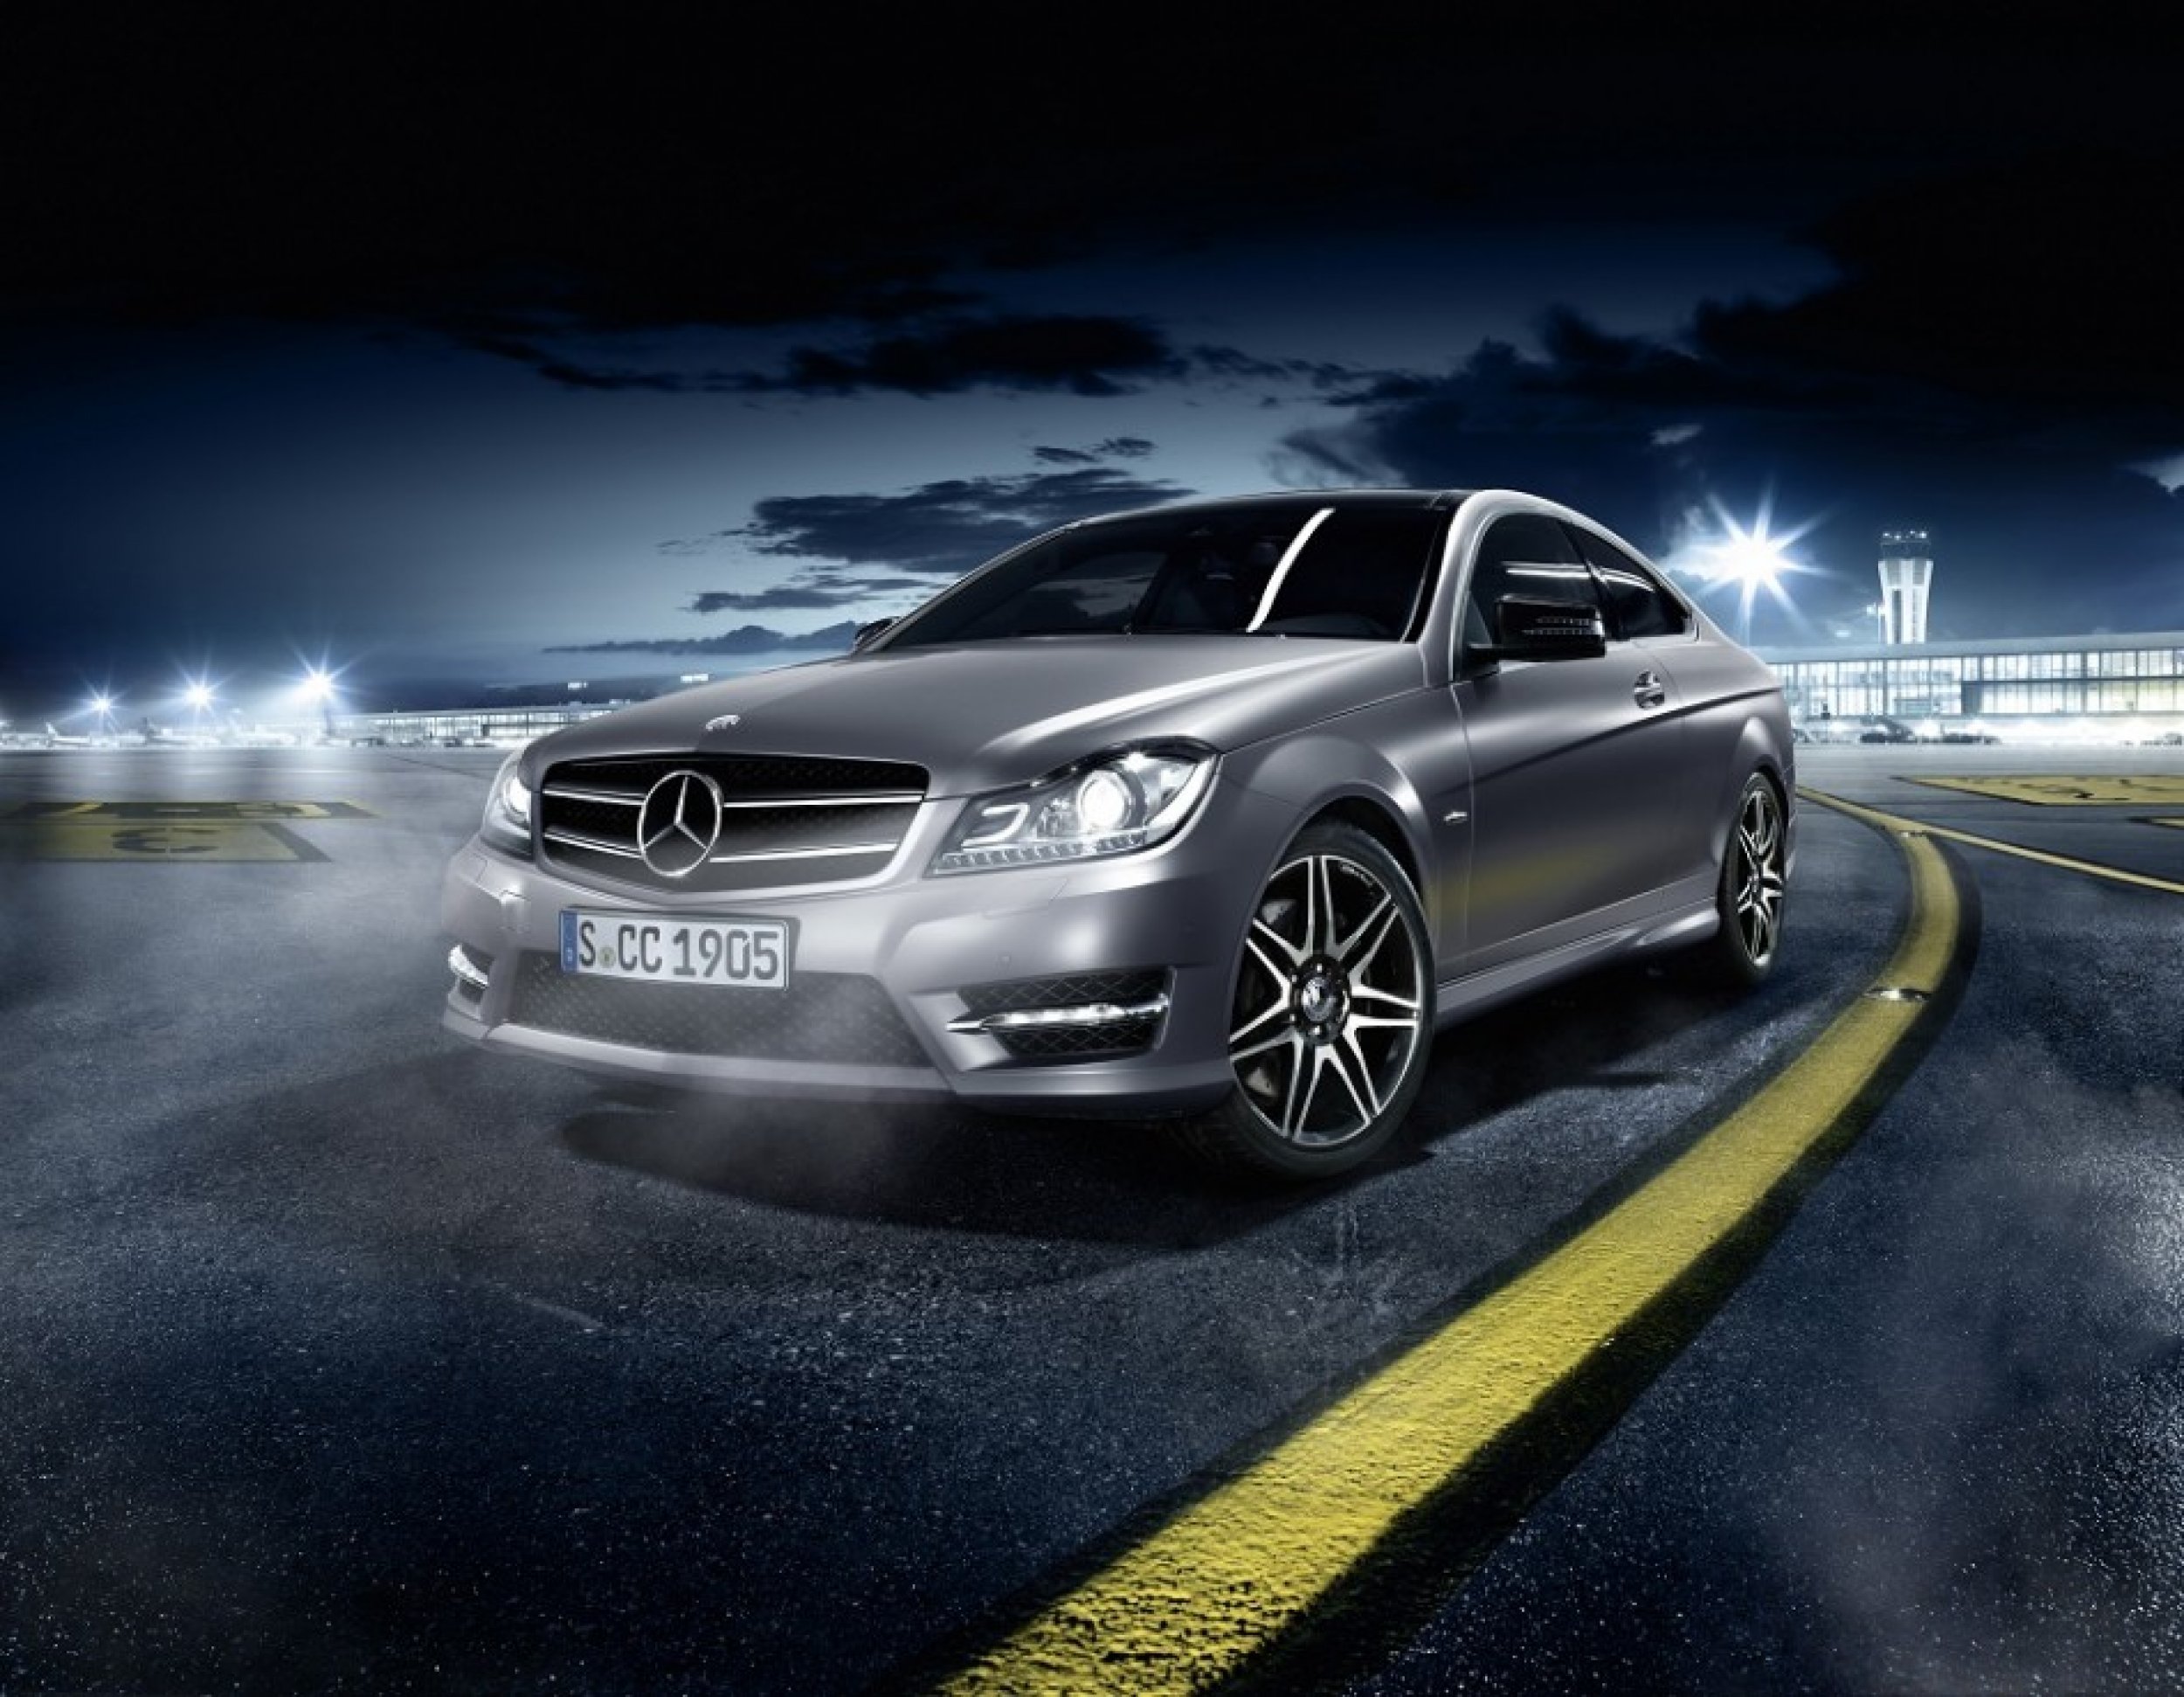 The 3 car in Americas wealthiest zip codes is the Mercedes-Benz C-Class with an MSRP of 36,095.